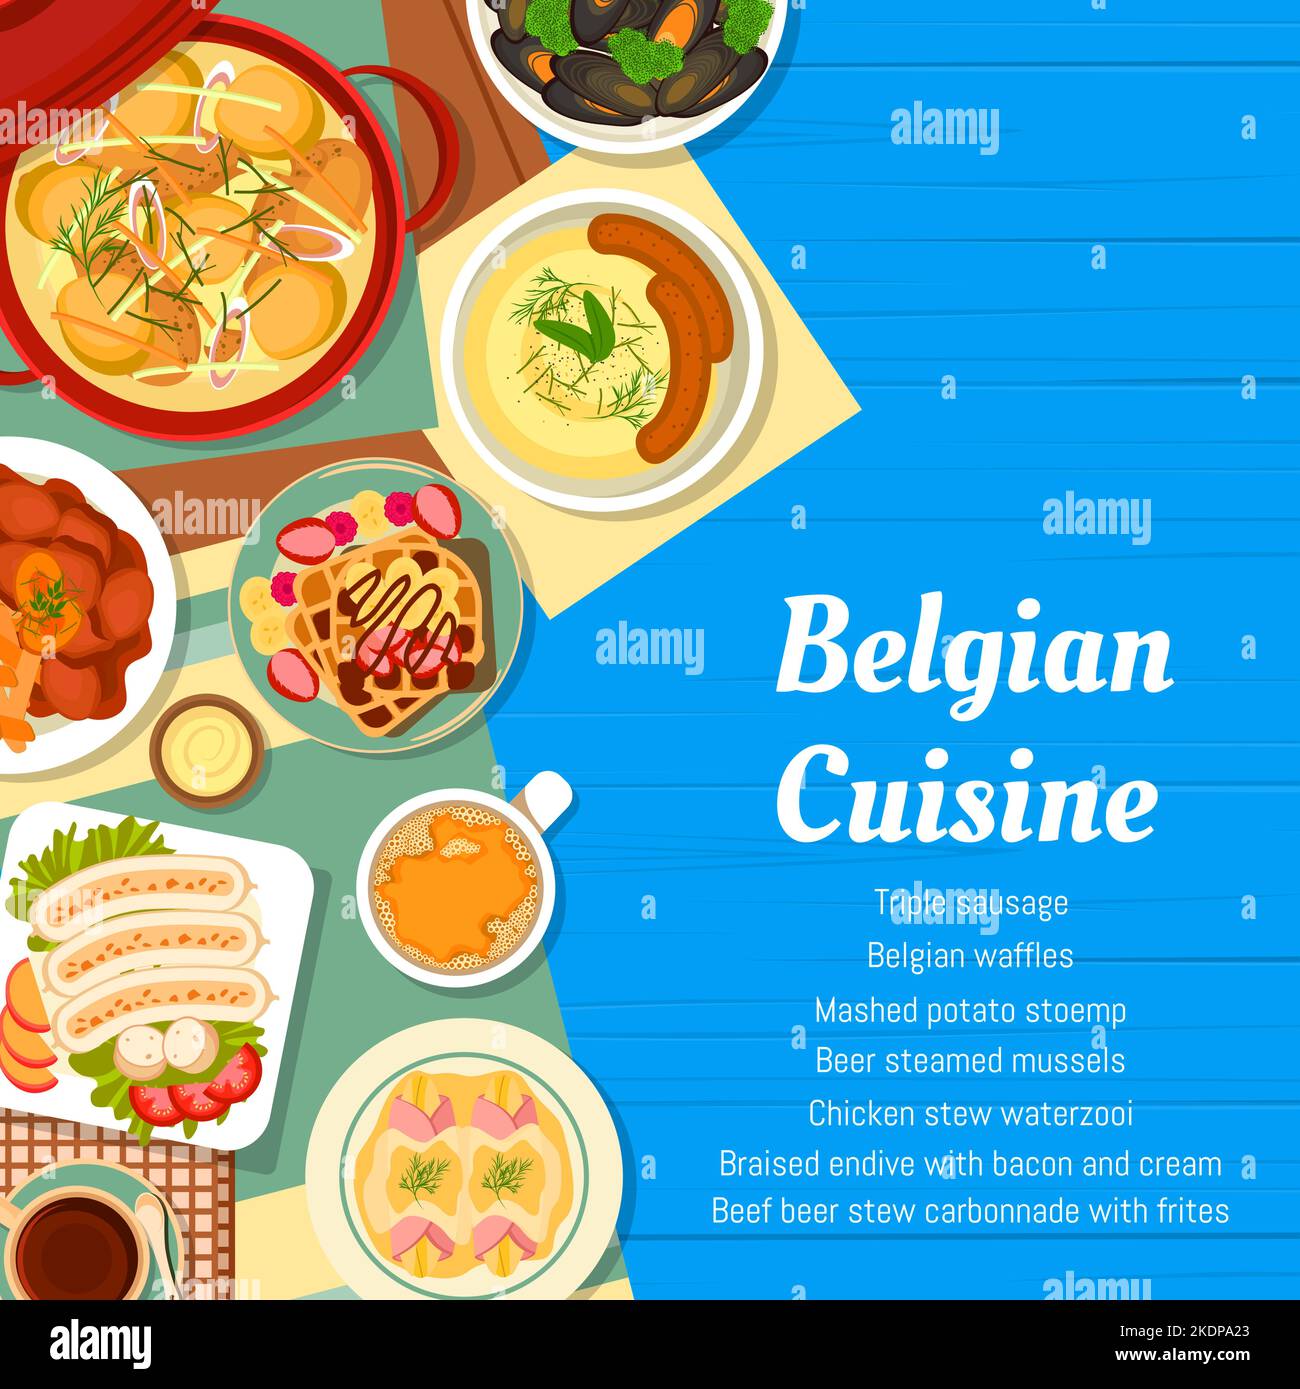 Belgian cuisine menu cover with Belgium food meals, vector restaurant dishes. Traditional Belgian food lunch or dinner meals beef beer stew carbonnade with frites, Belgian waffles and triple sausage Stock Vector